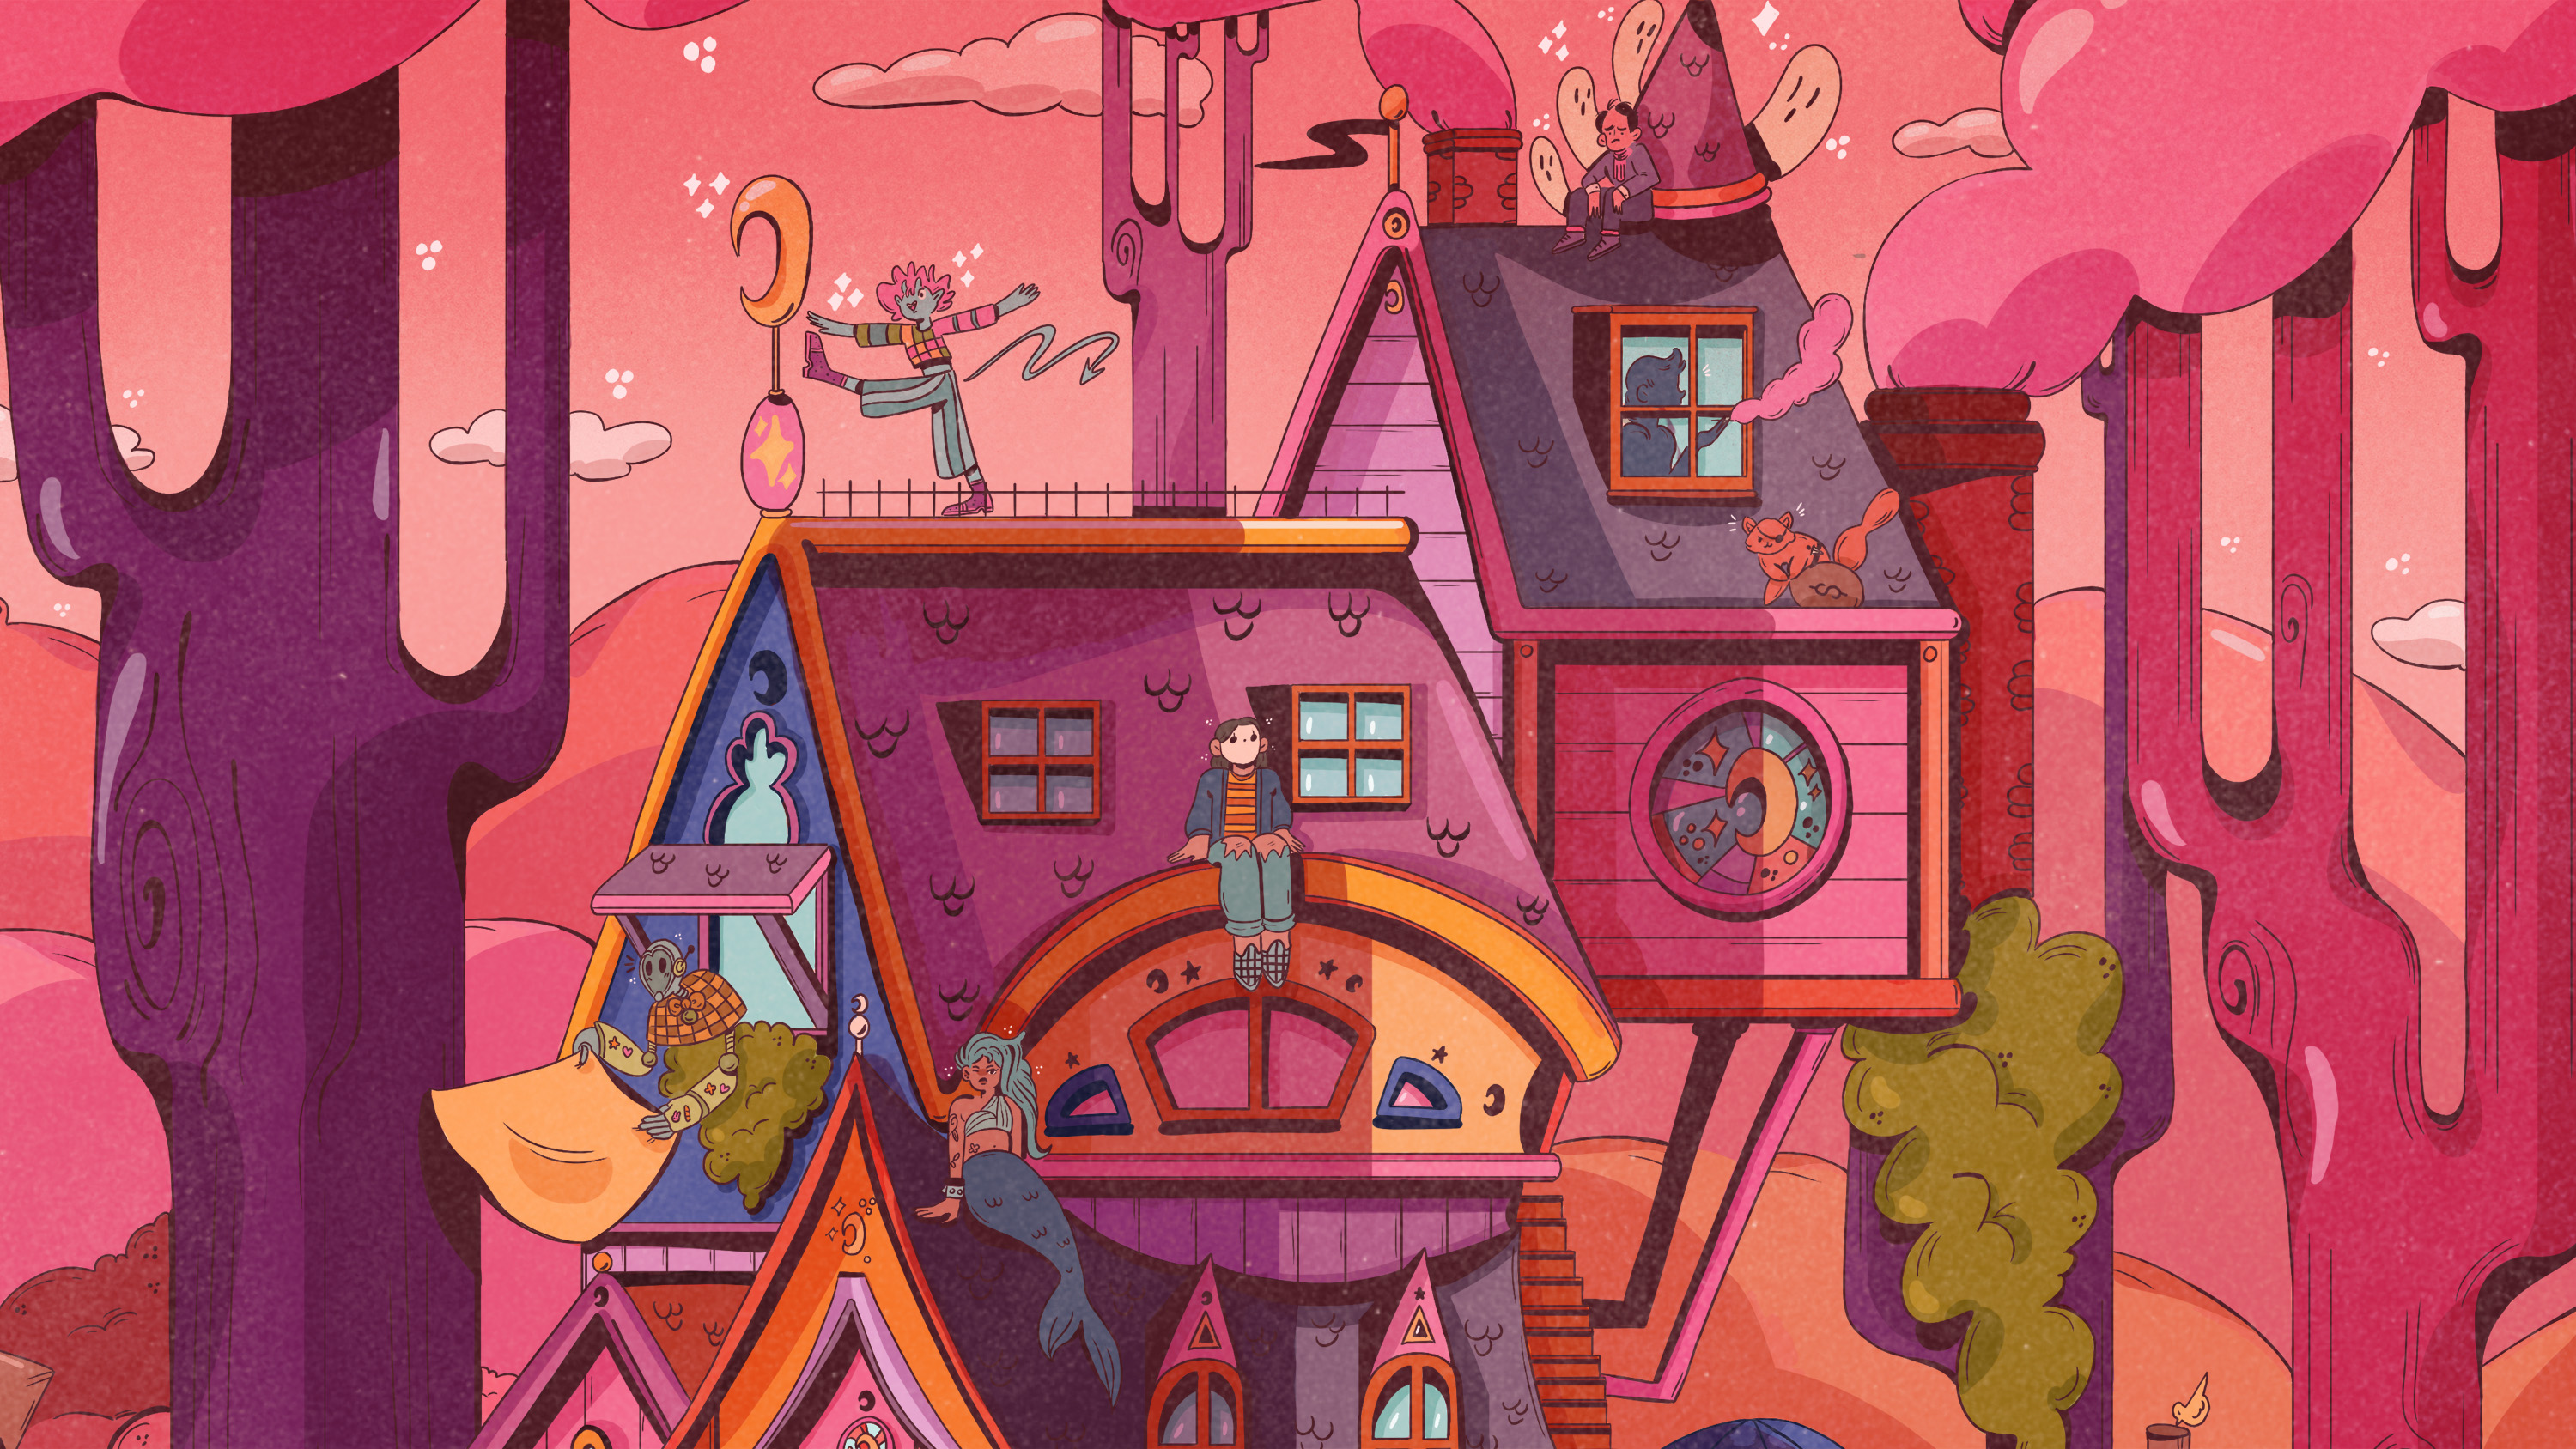 Colorful characters populate the roof of a Old Woman’s Shoe-style cottage, backlit by a rosy pink sky.